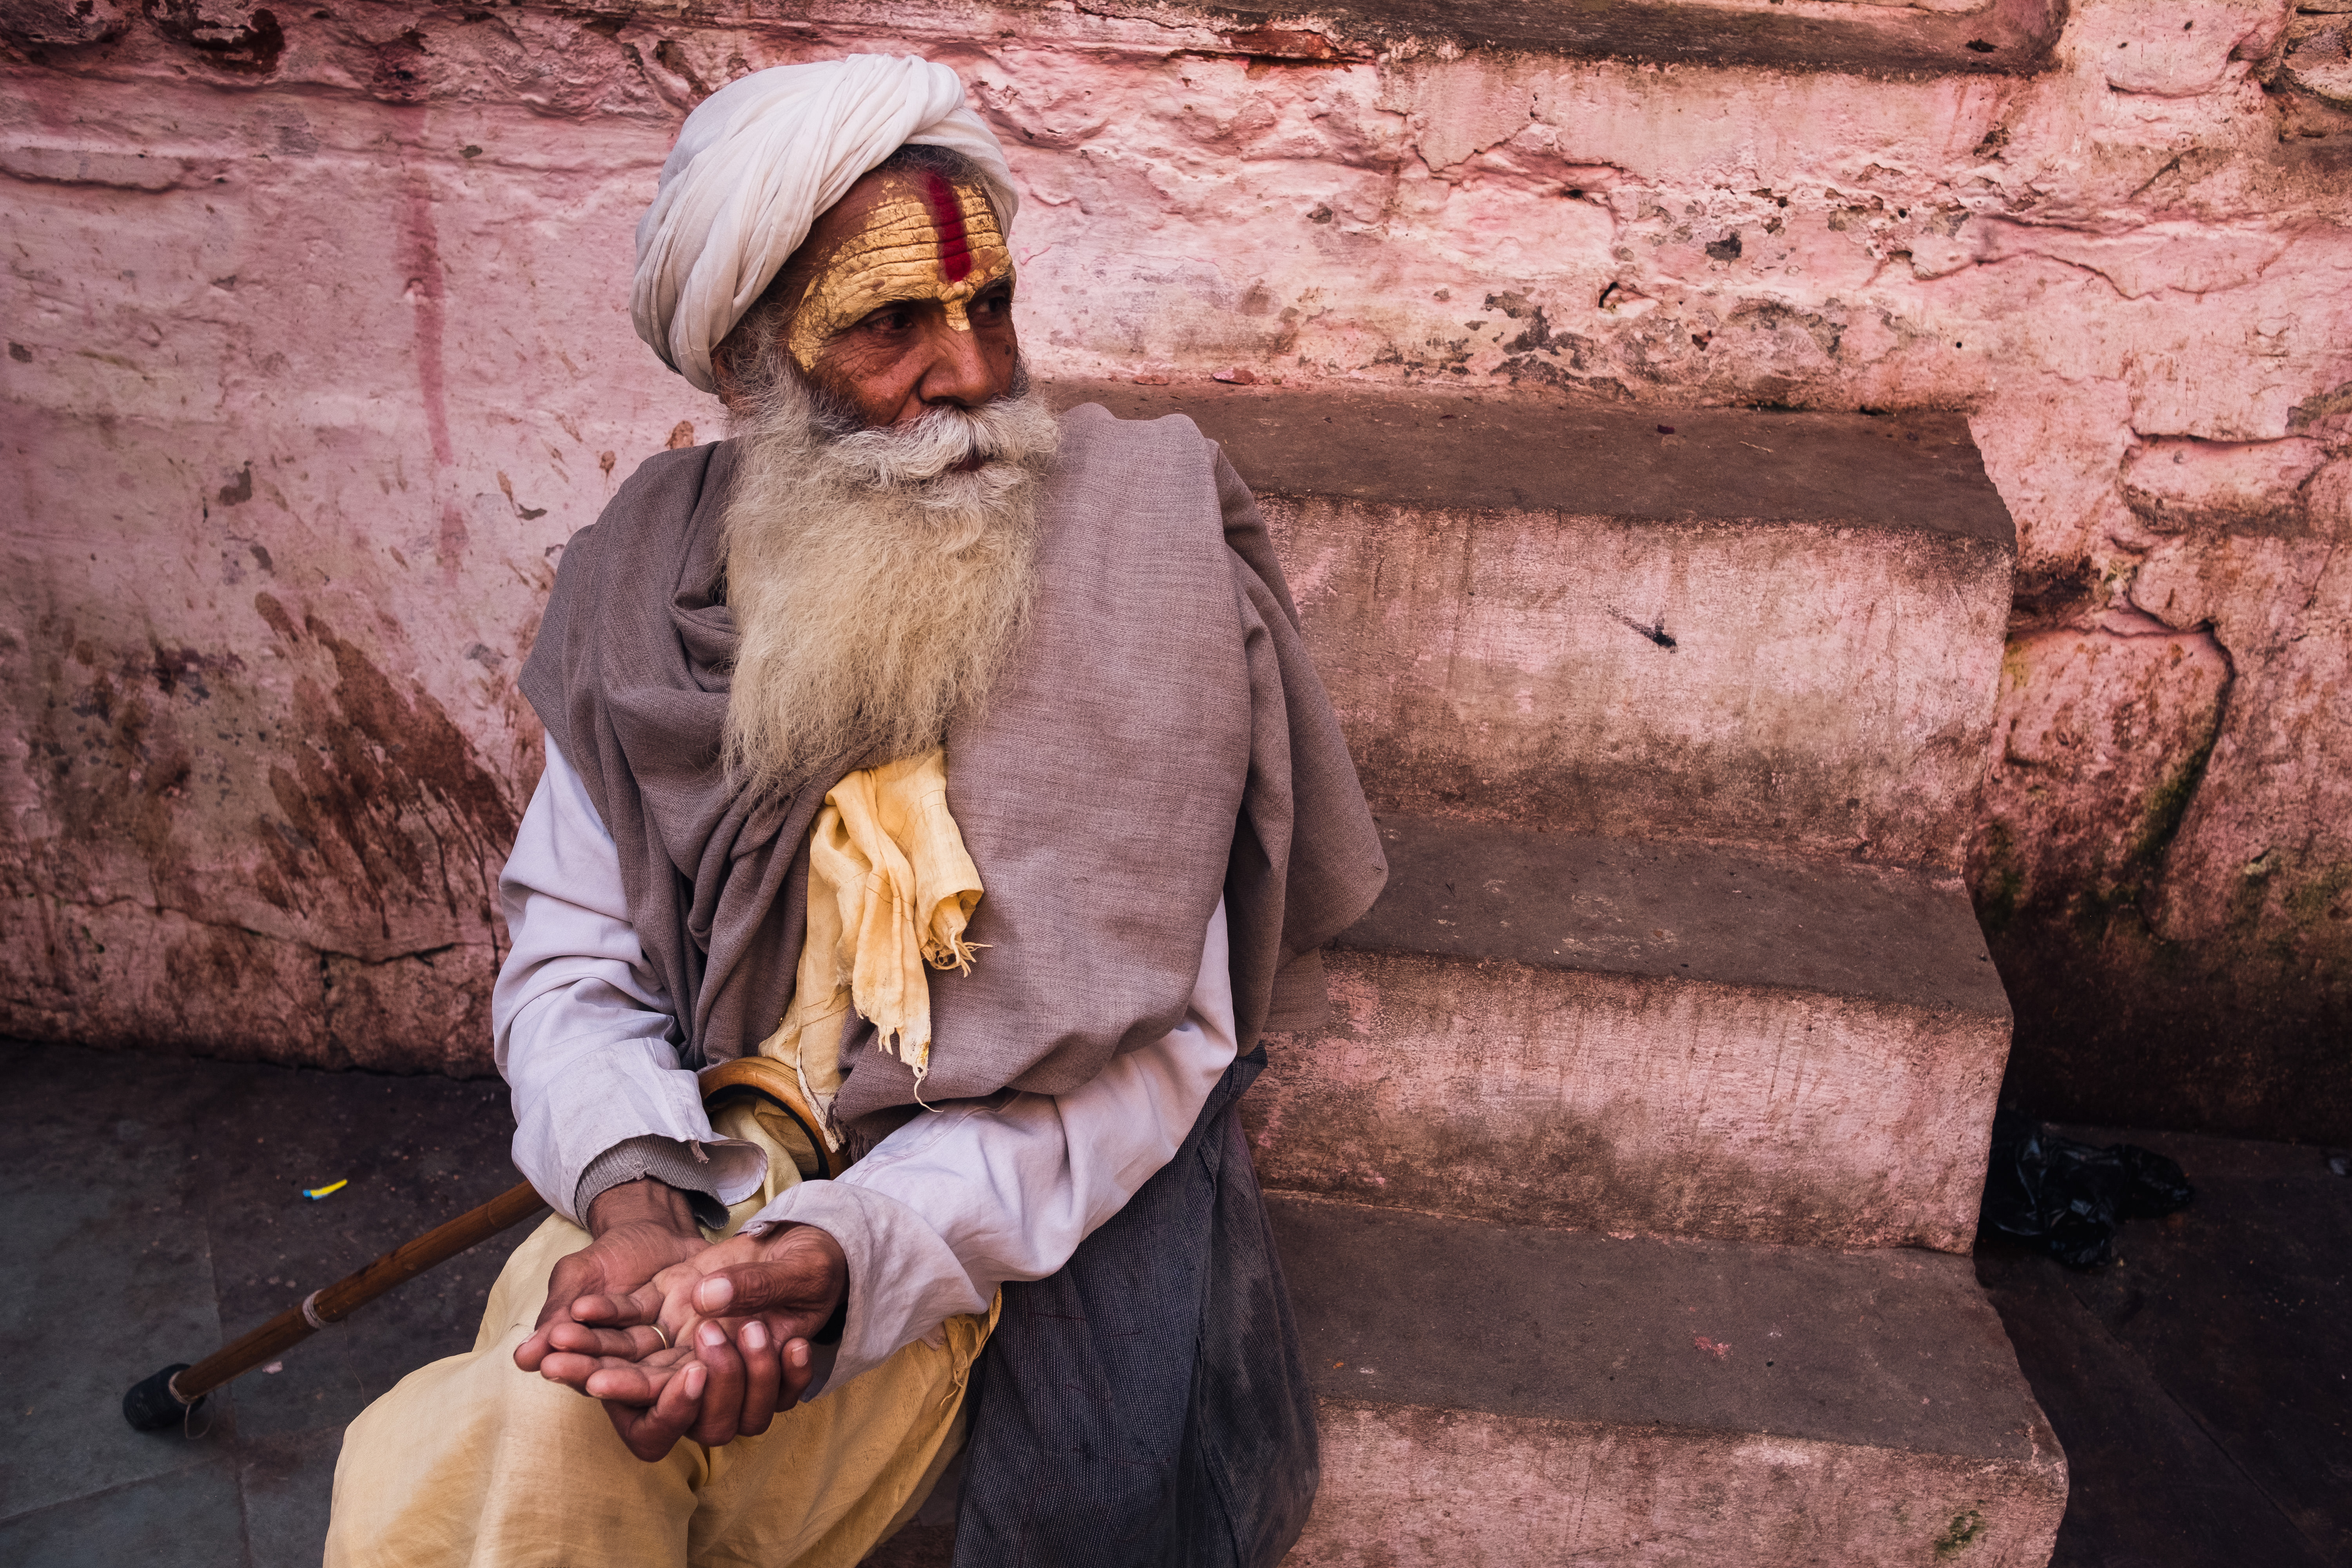 India Street Photography During Holi Festival. Priest sitting in front of wall asking for money. Images by Jason Vinson